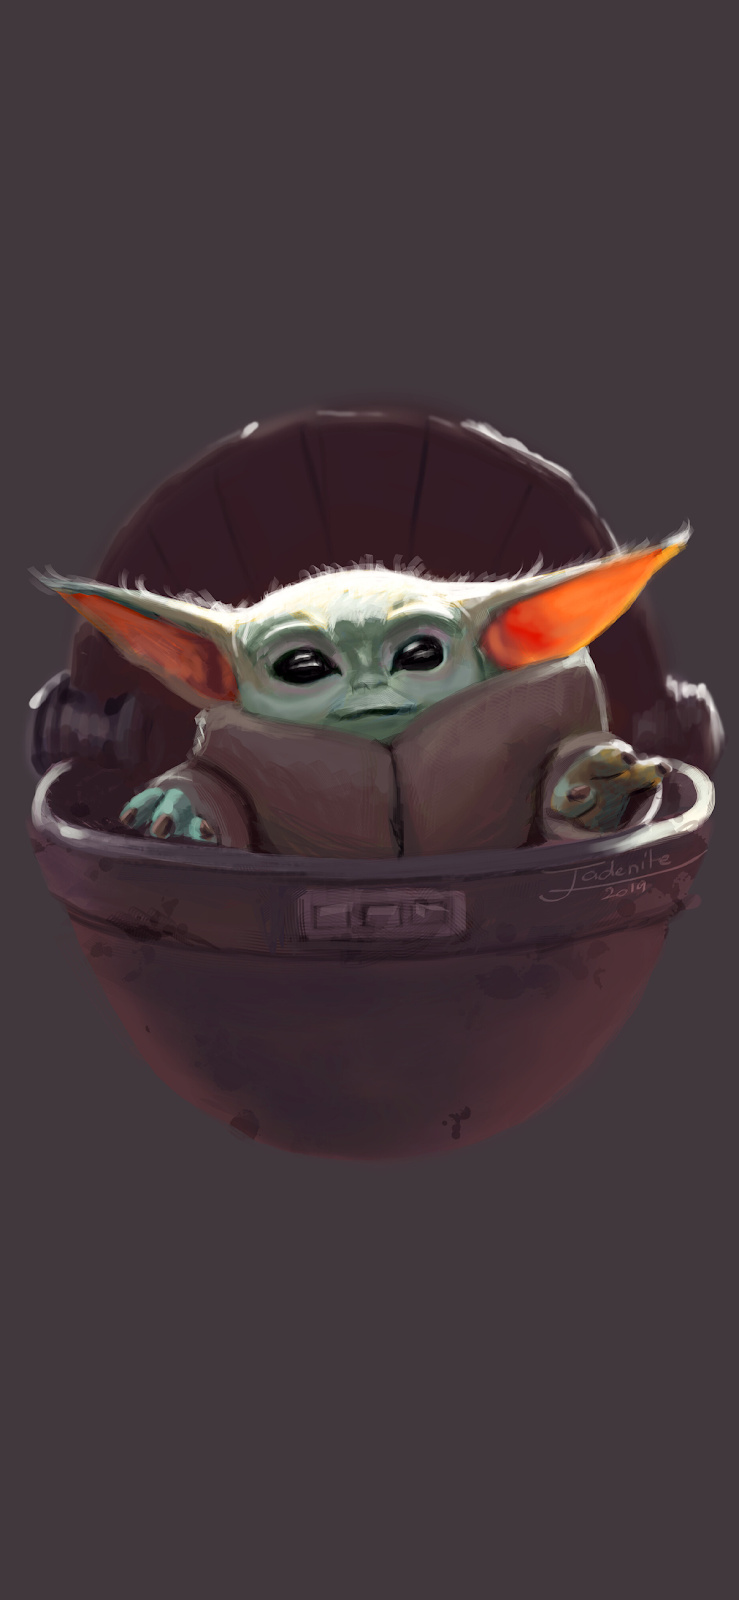 The child Baby Yoda phone wallpaper collection. Cool Wallpaper.cc. Yoda wallpaper, Cool wallpaper, iPhone wallpaper